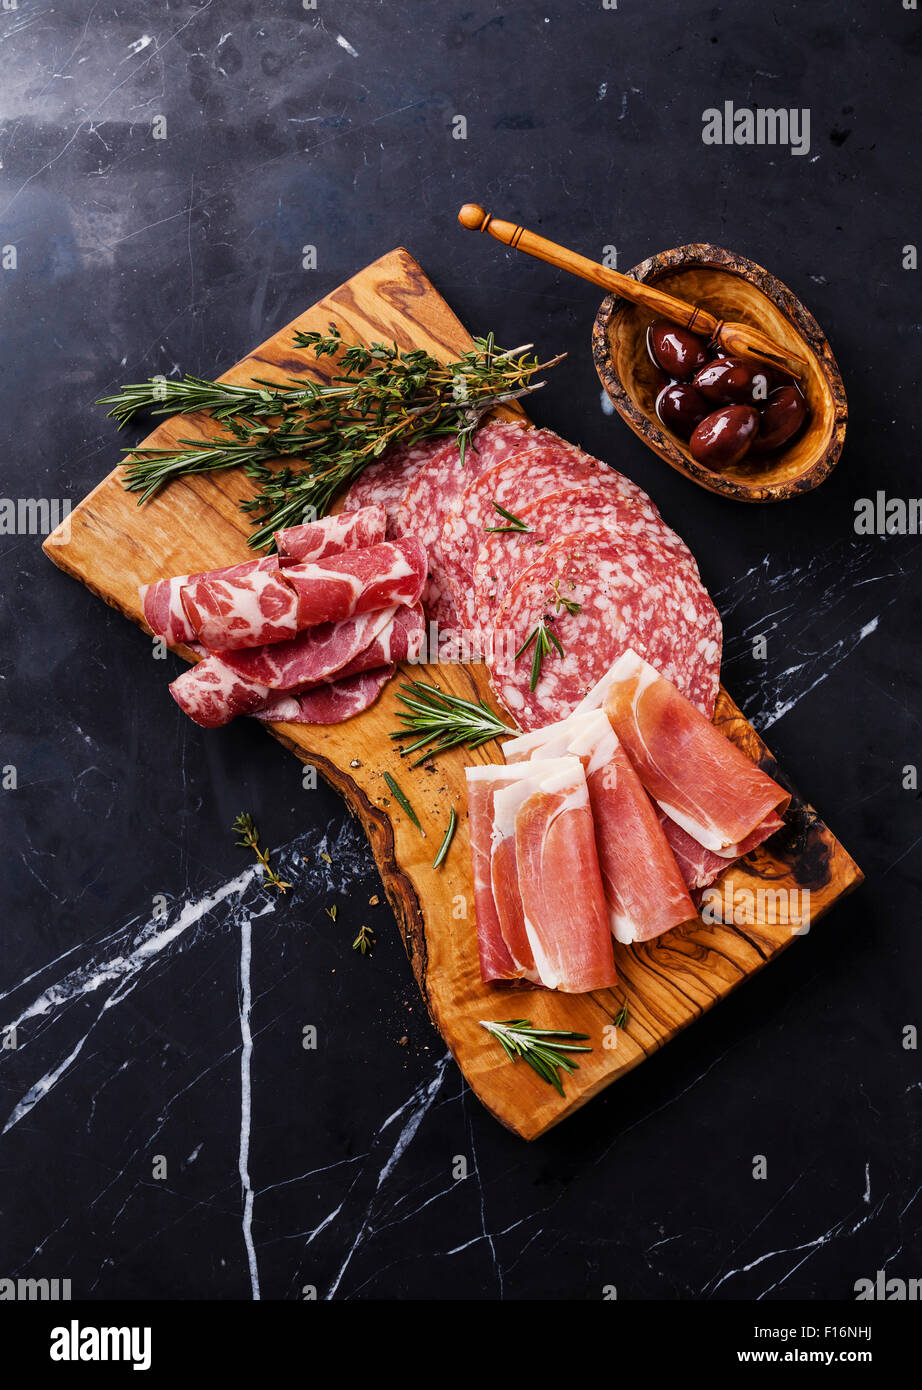 Sliced prosciutto di Parma on wooden board with salami and rosemary on black marble background Stock Photo